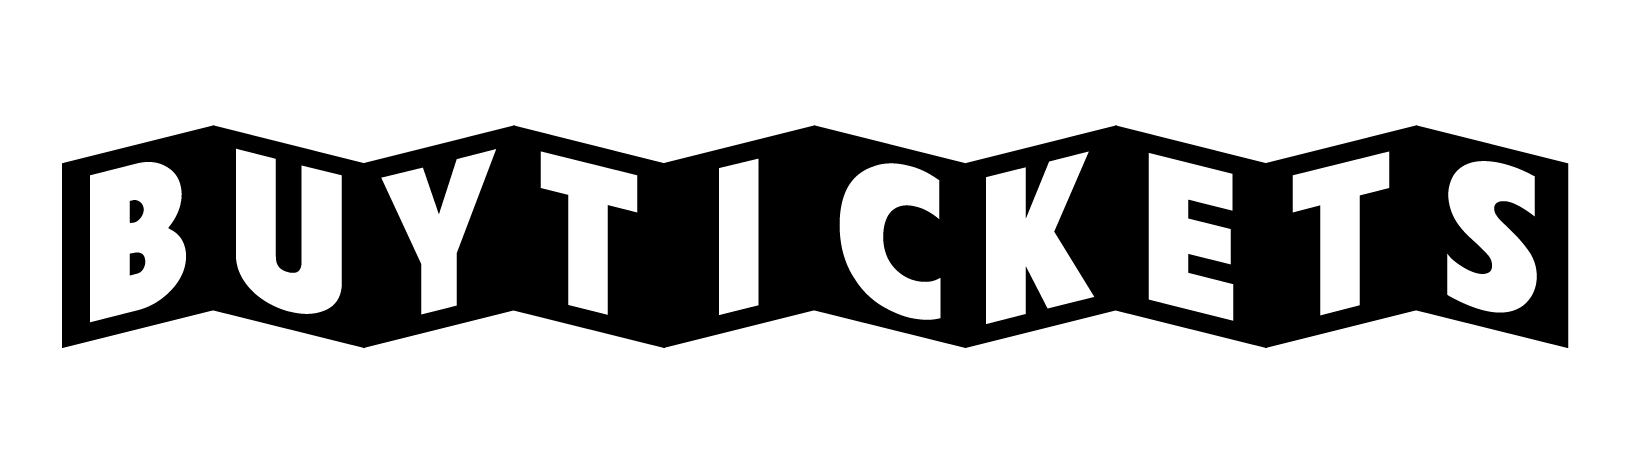 Cinerama style, black-and-white text: "BUY TICKETS"